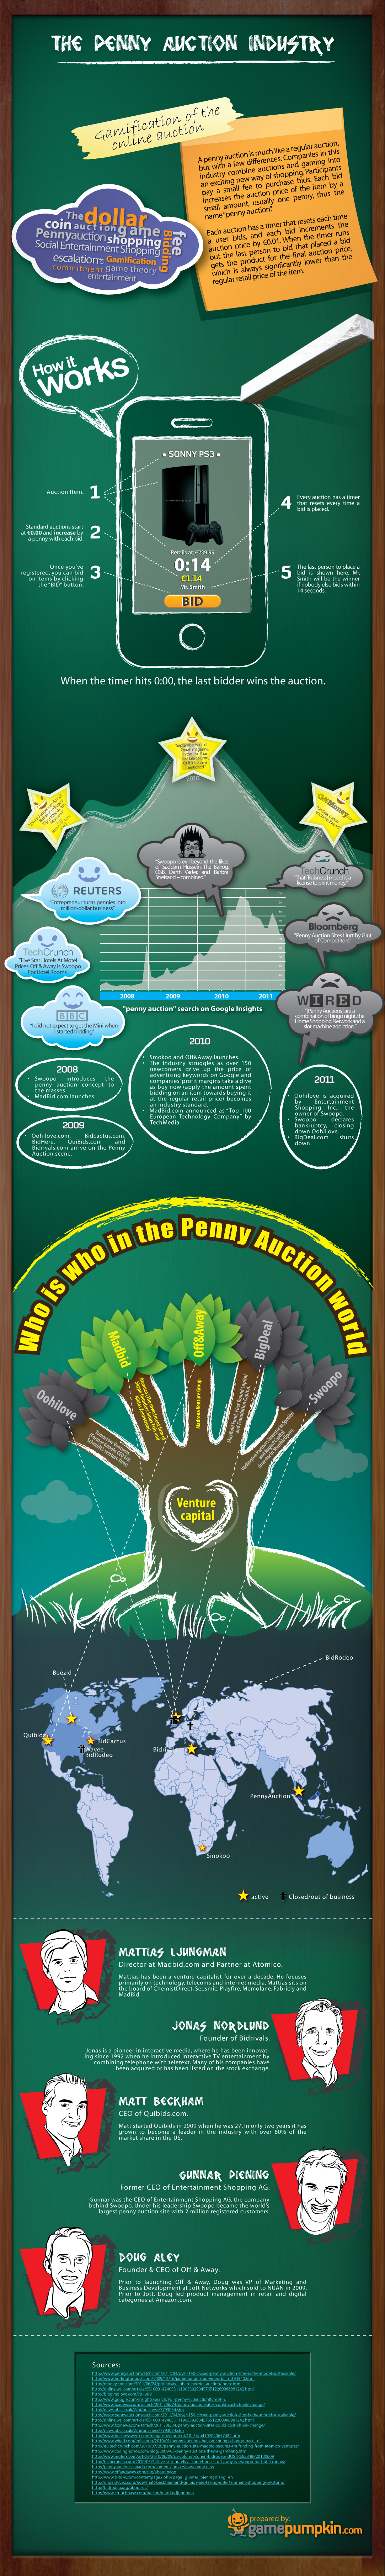 The Penny Auction Industry 2